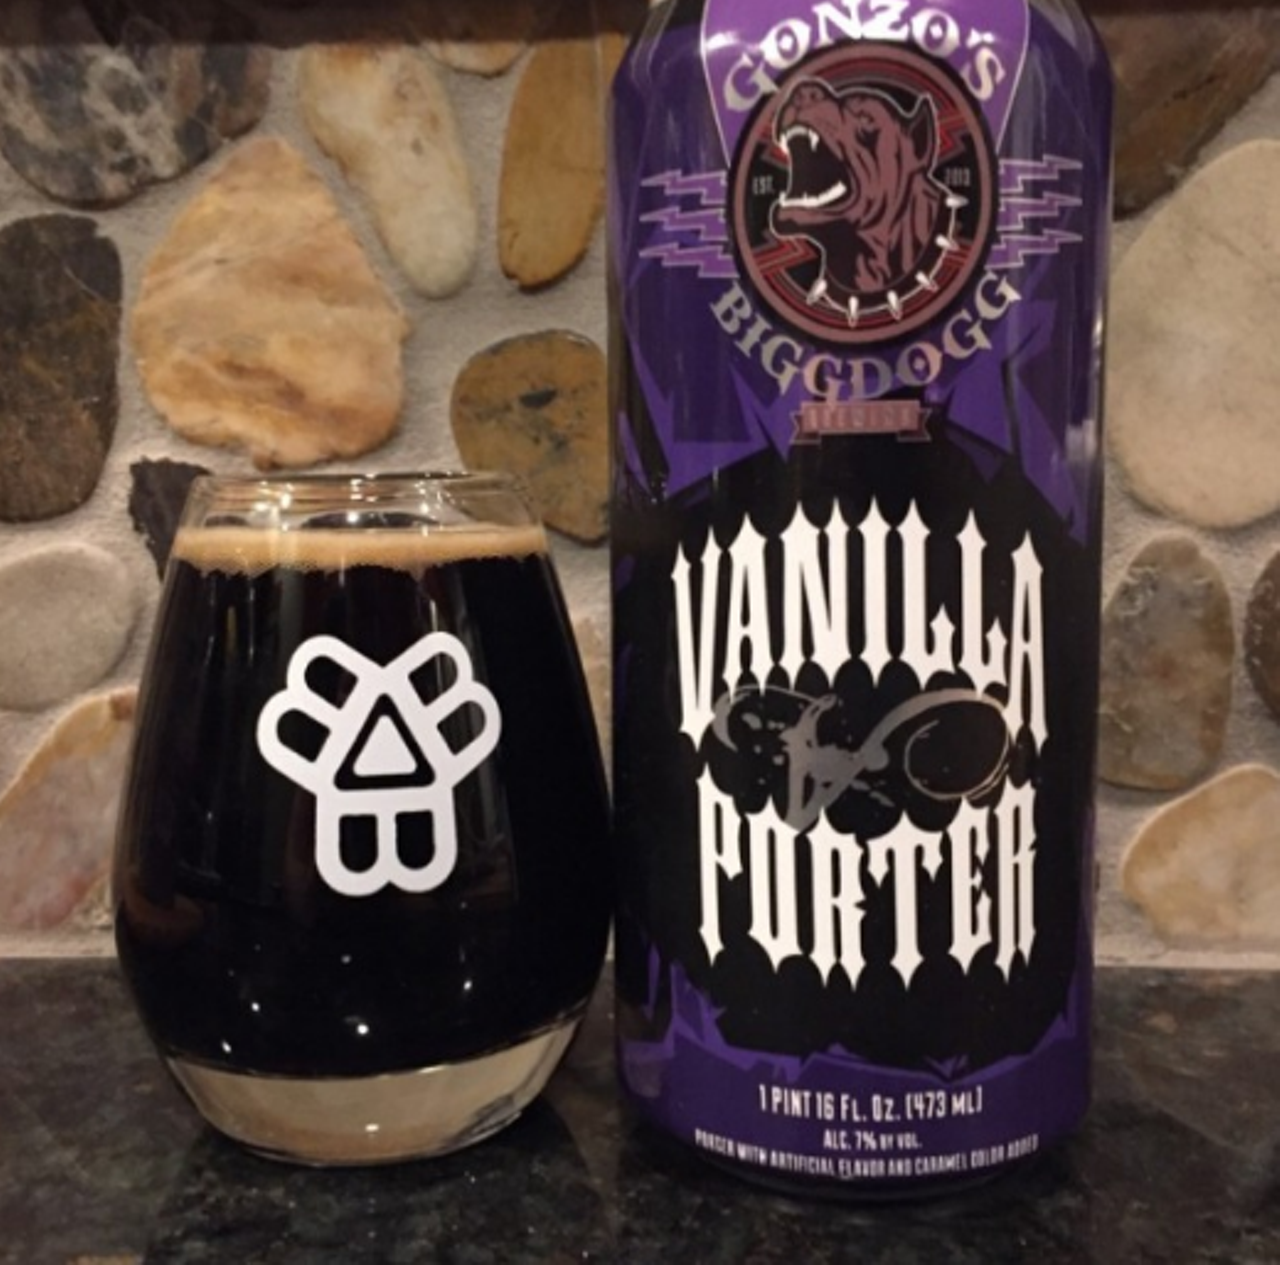 Vanilla Porter Ale
Style: Porter
ABV: 7.0%
Another brew from Gonzo&#146;s BiggDogg, this Vanilla Porter is one of the best ones we&#146;ve ever tasted. It&#146;s sweet, rich, smooth, and has a fantastic blend of chocolate and vanilla.